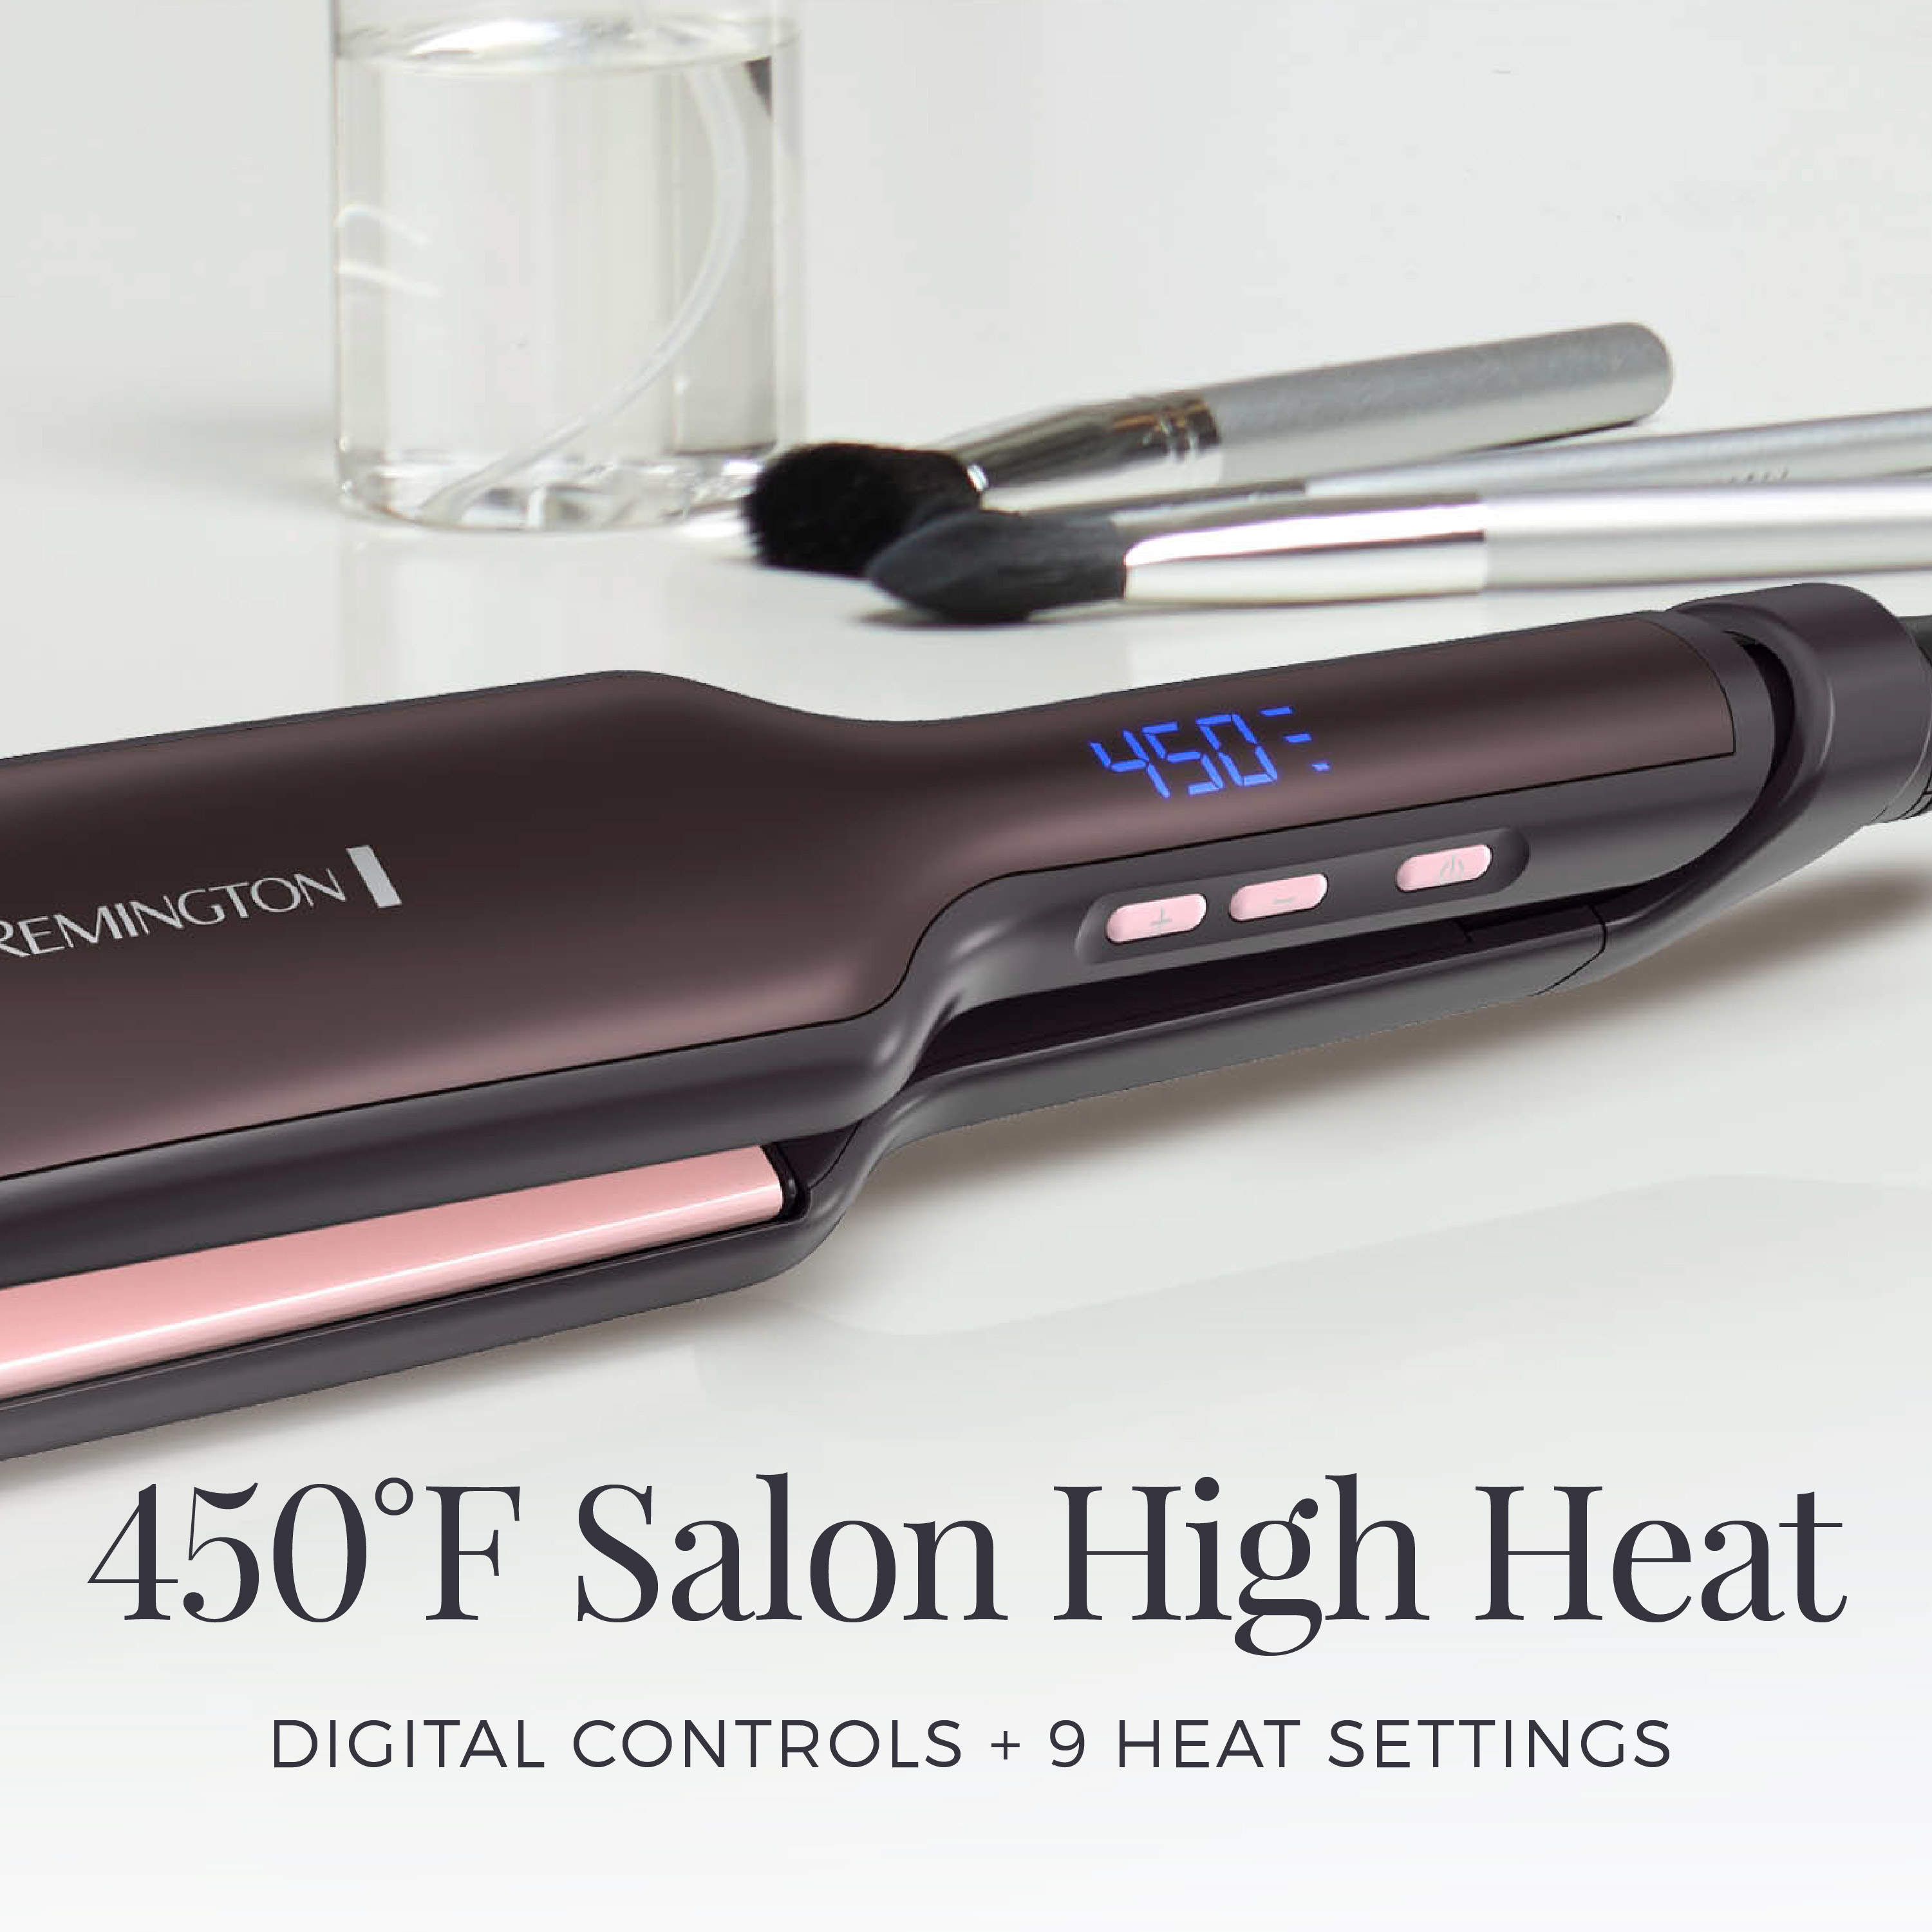 Remington Pro Soft Touch Finish and Digital Controls Professional 2" Pearl Ceramic Flat Iron Hair Straightener, Black - image 5 of 15